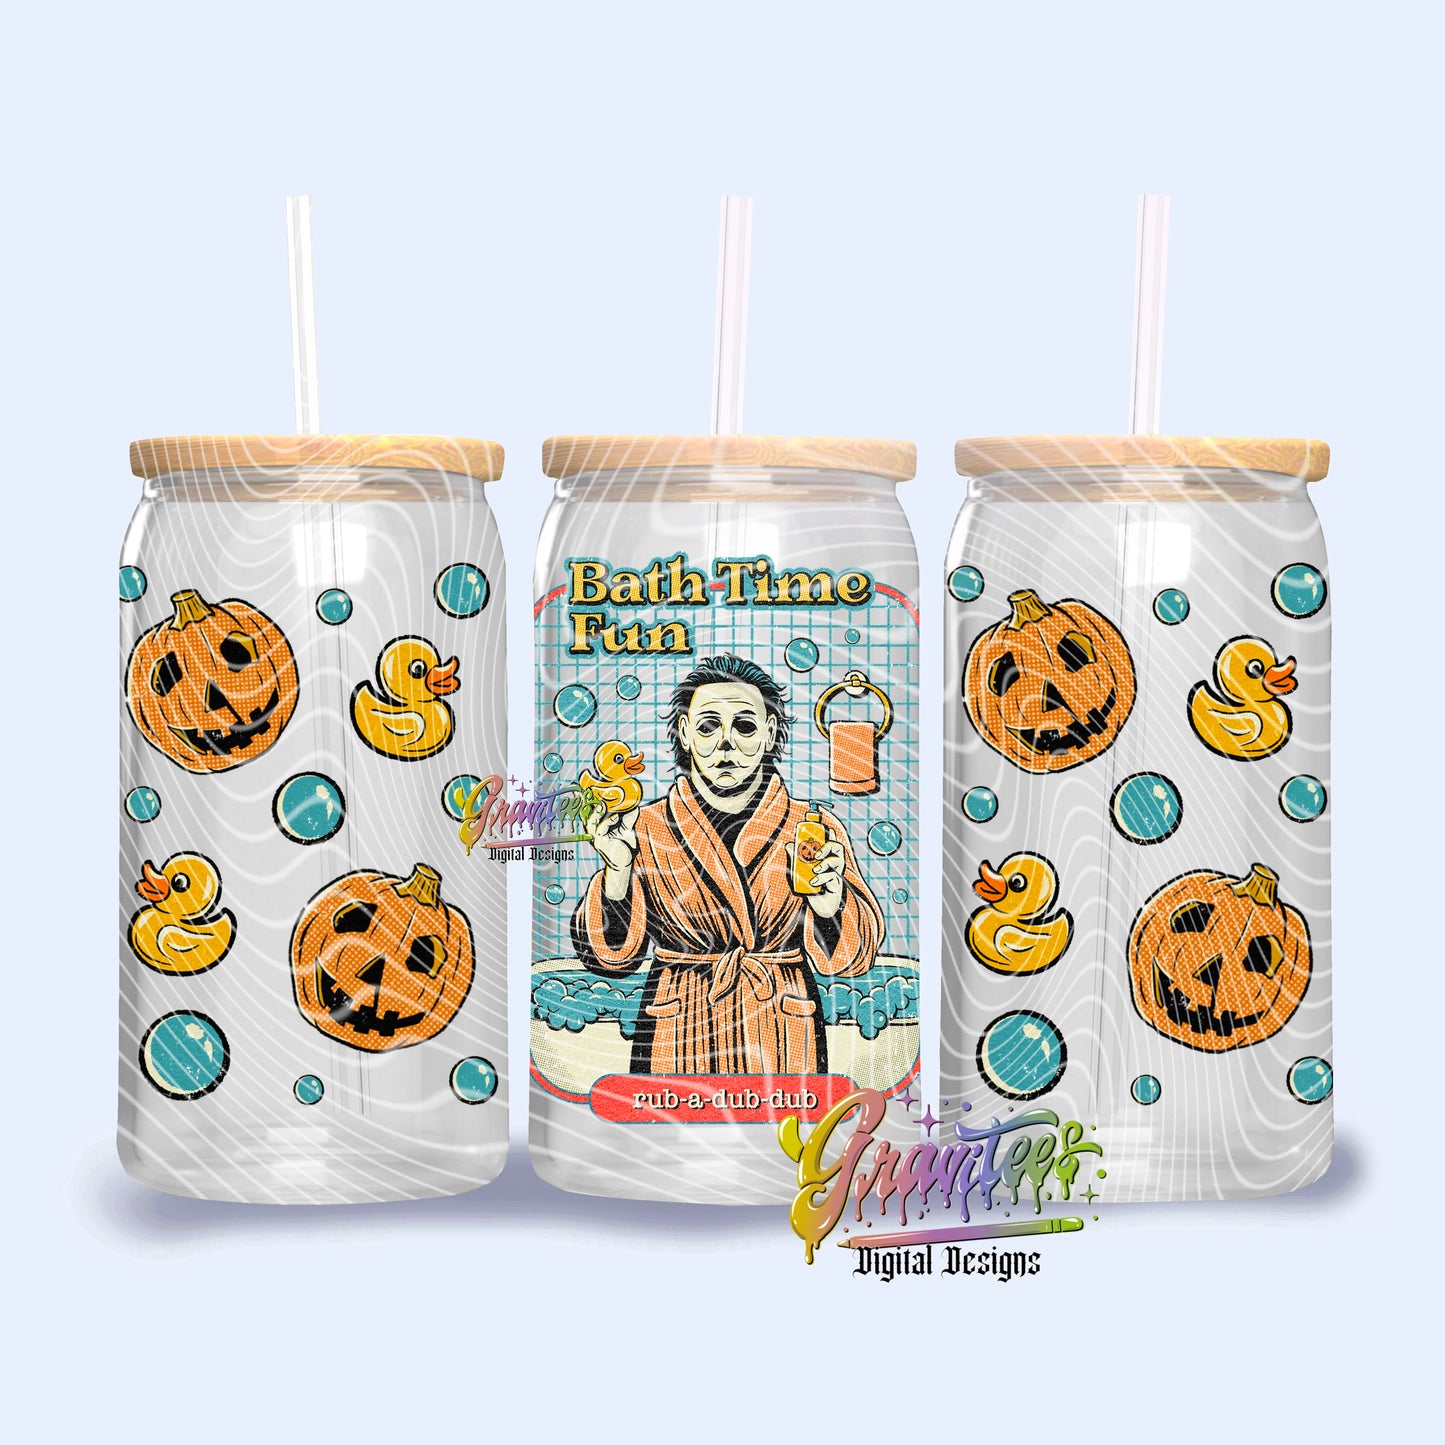 BATH TIME HORROR Libbey Design Png, BATH TIME HORRORLibbey, BATH TIME HORROR Libbey Template for UVDTF or Sublimation Printing, PNG Only!